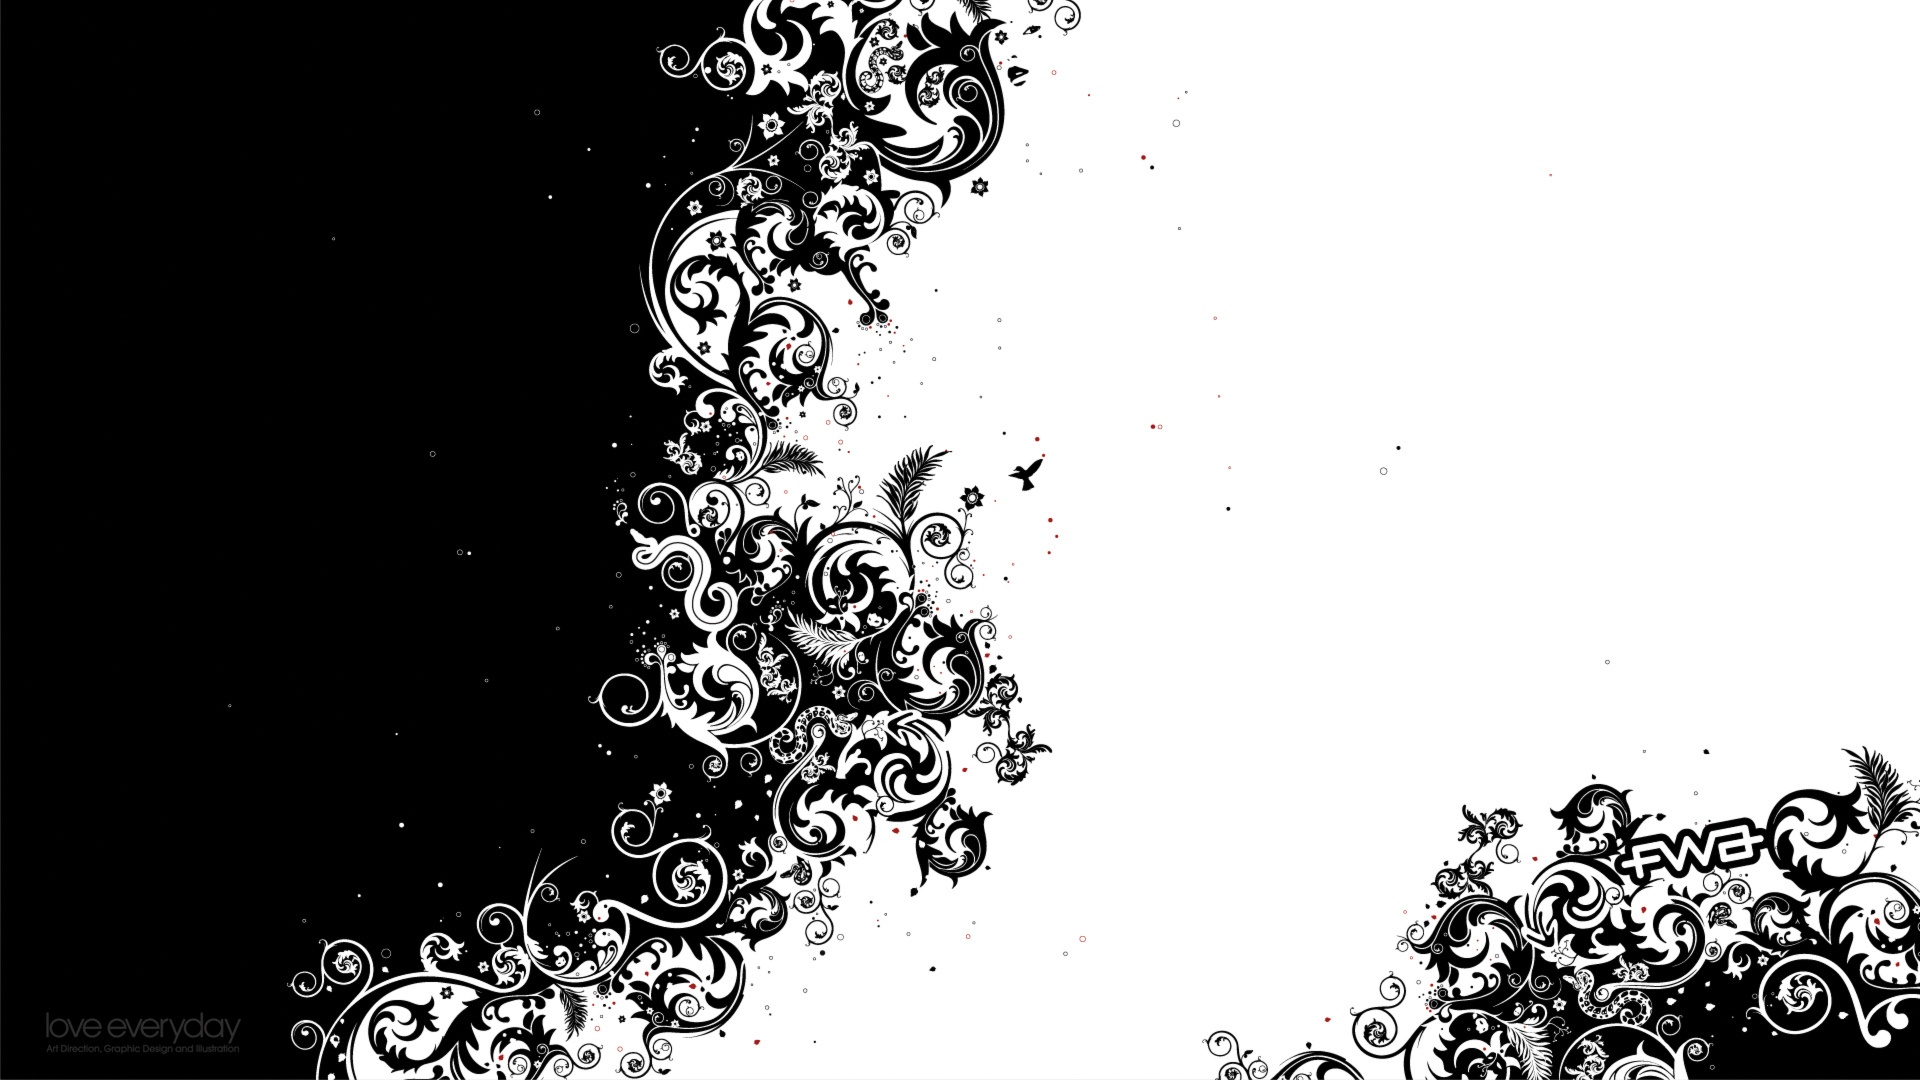 🔥 [78+] Cool Black And White Backgrounds | WallpaperSafari